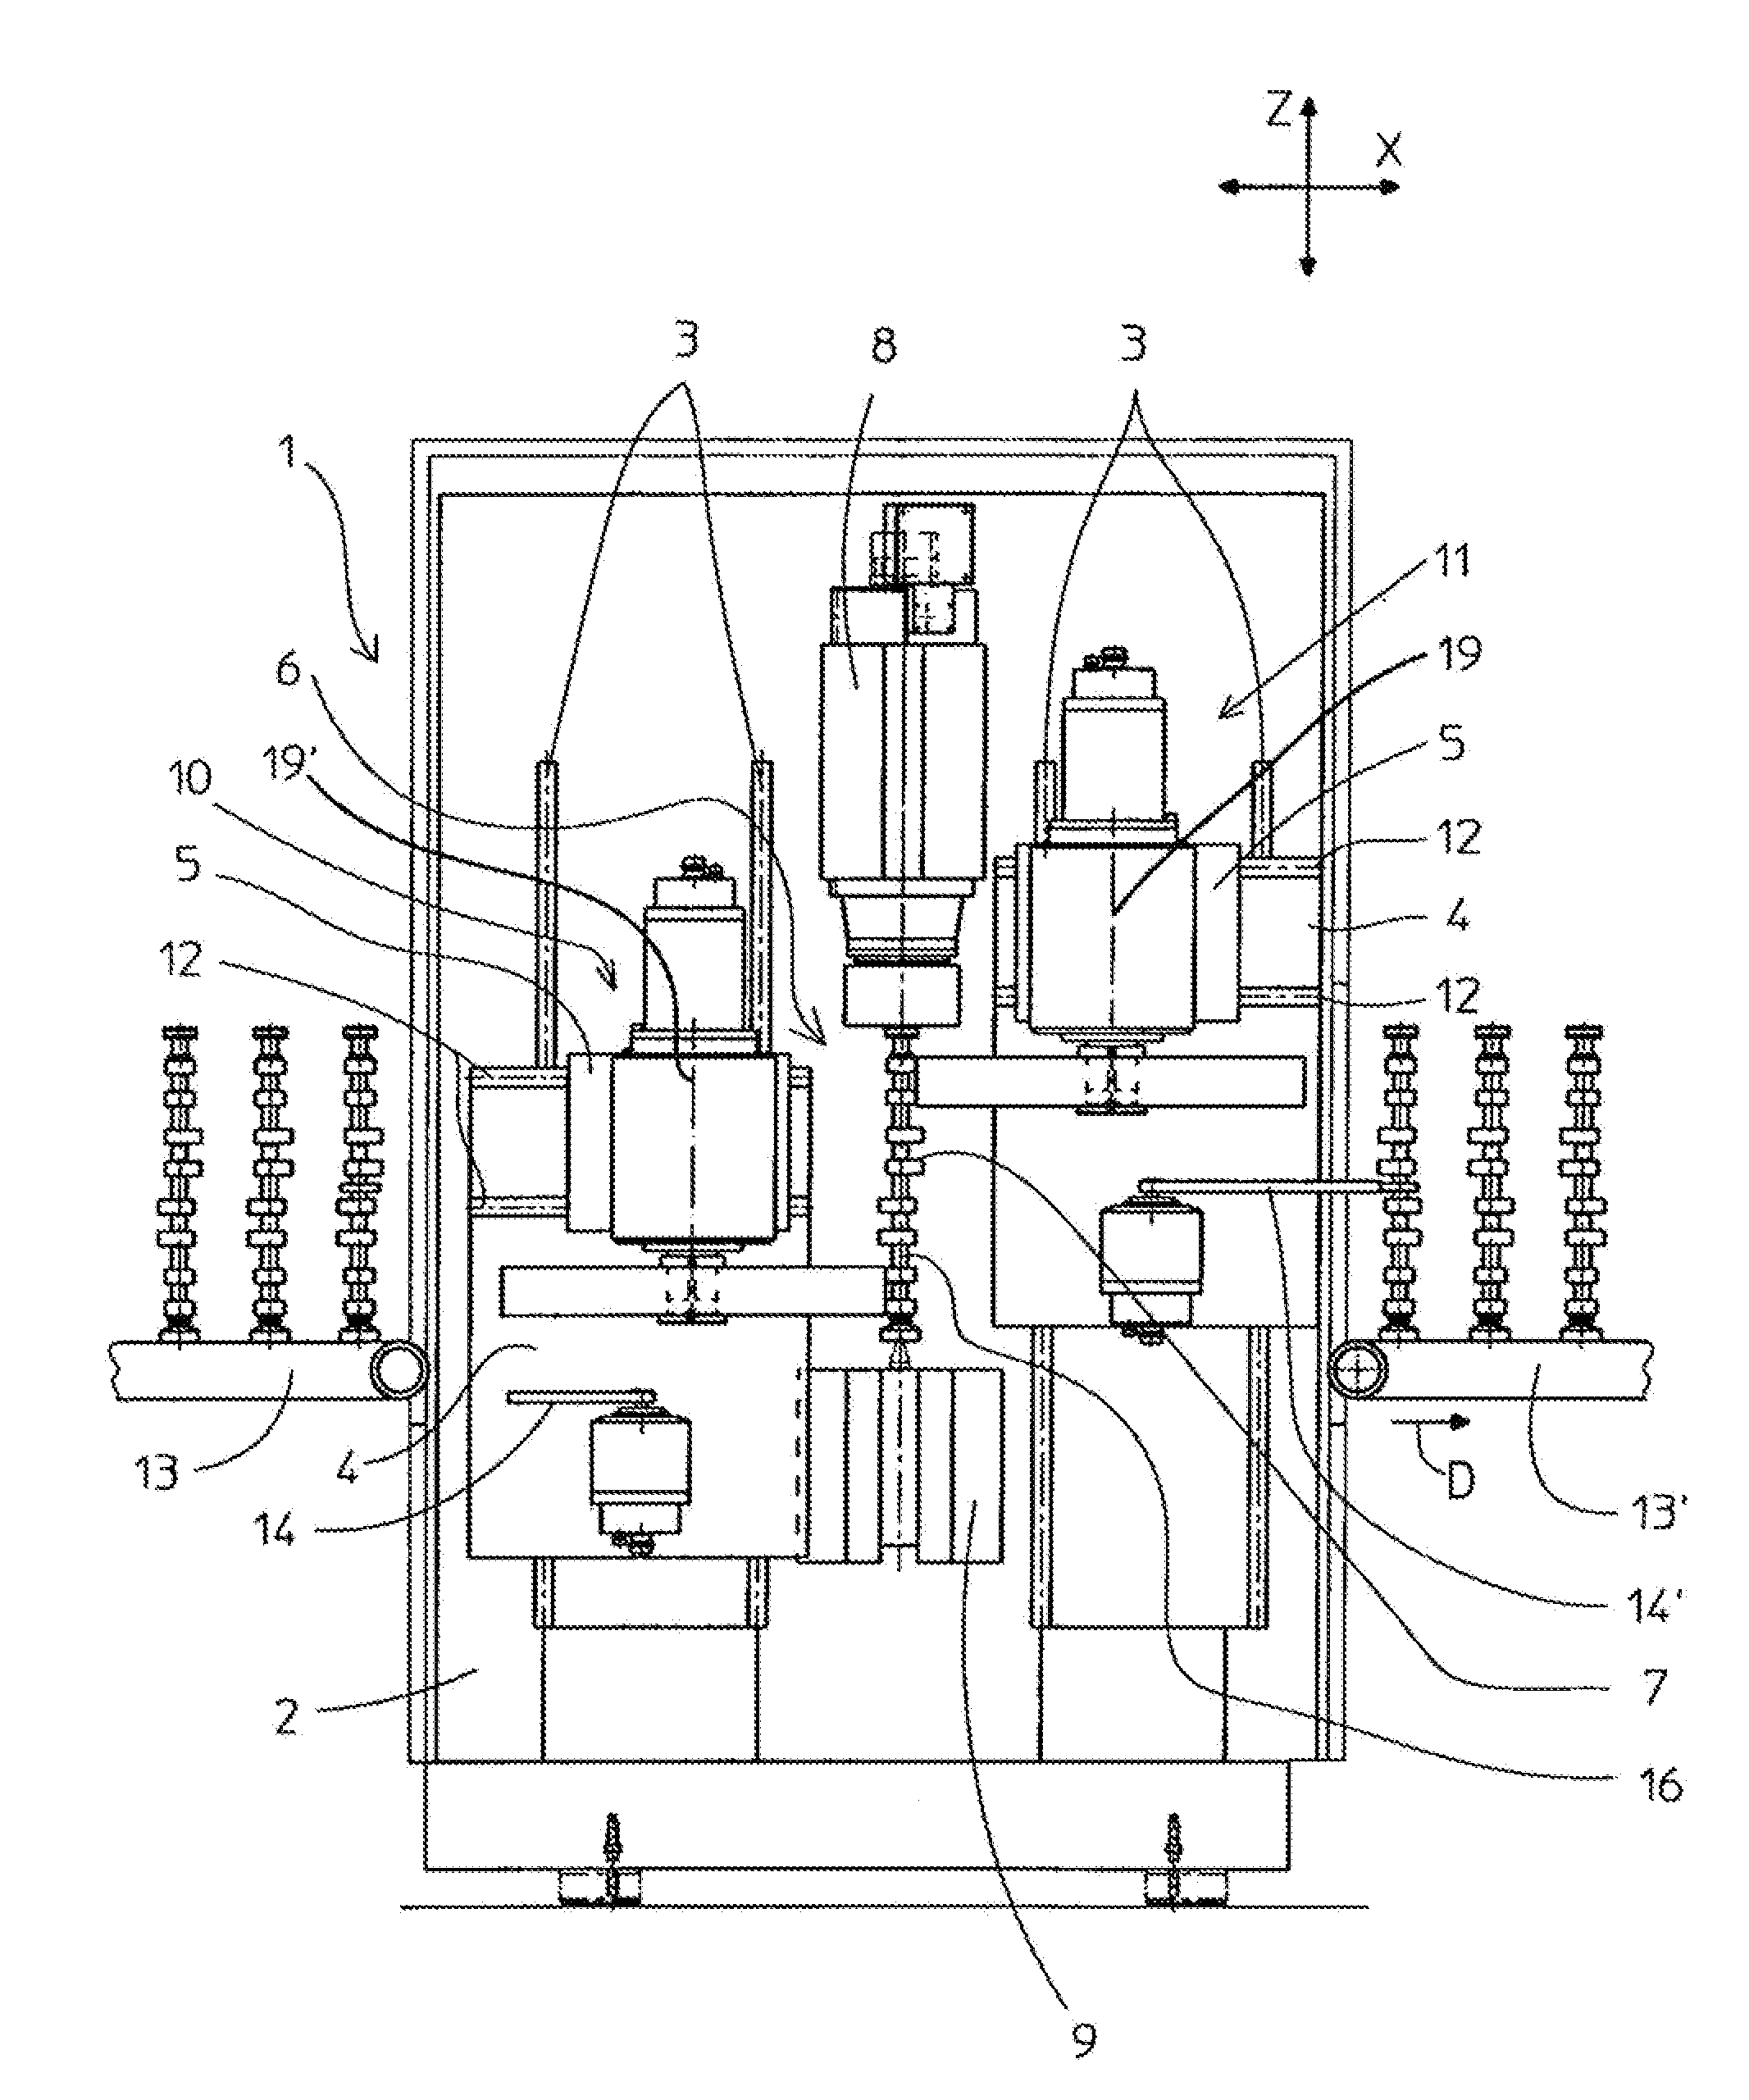 Method of and apparatus for grinding cams of a camshaft